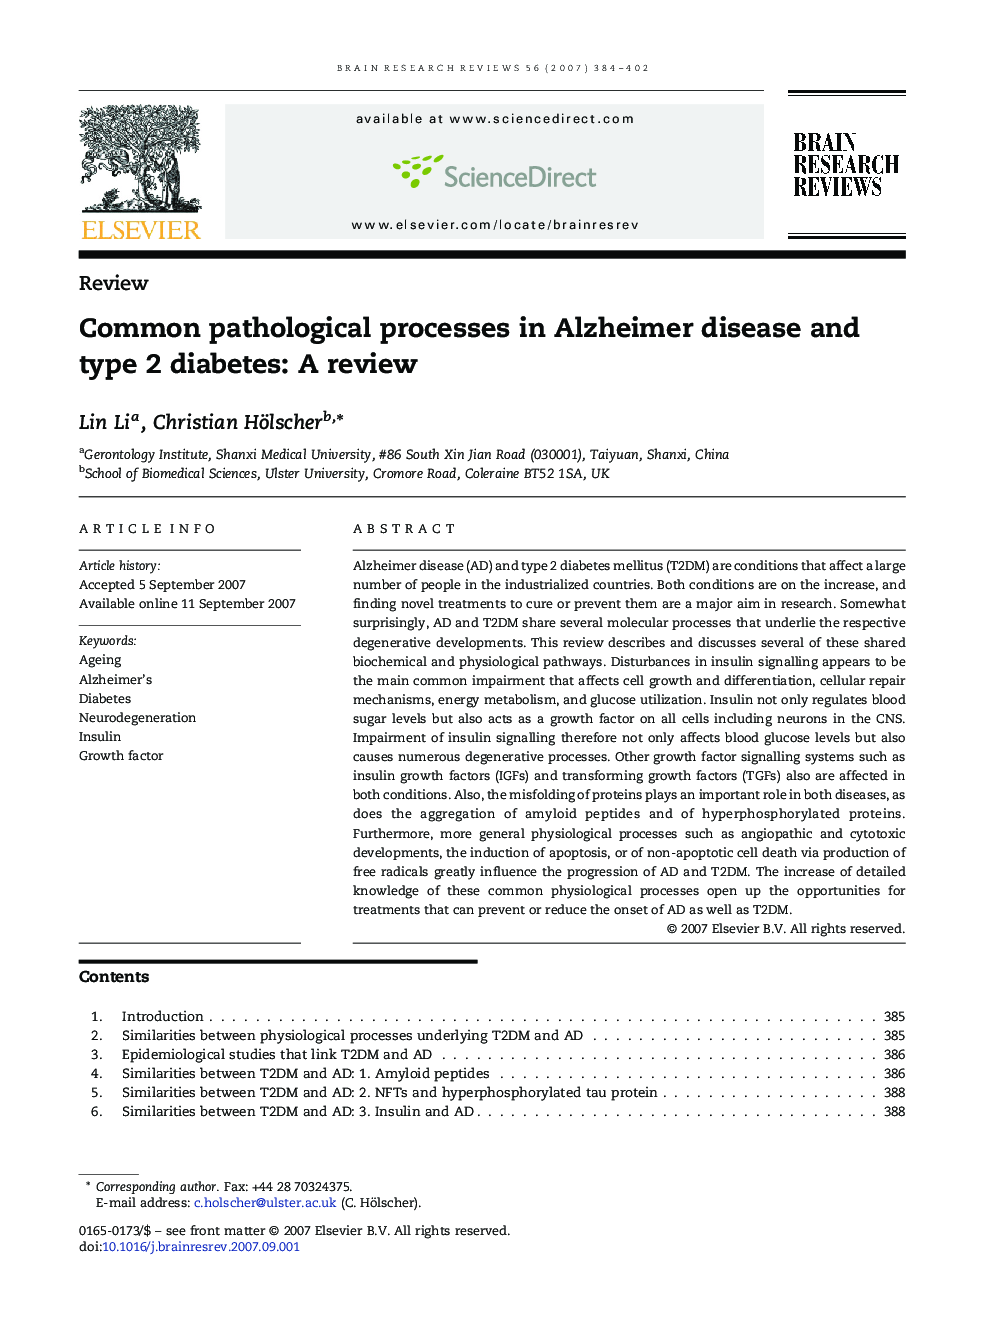 Common pathological processes in Alzheimer disease and type 2 diabetes: A review